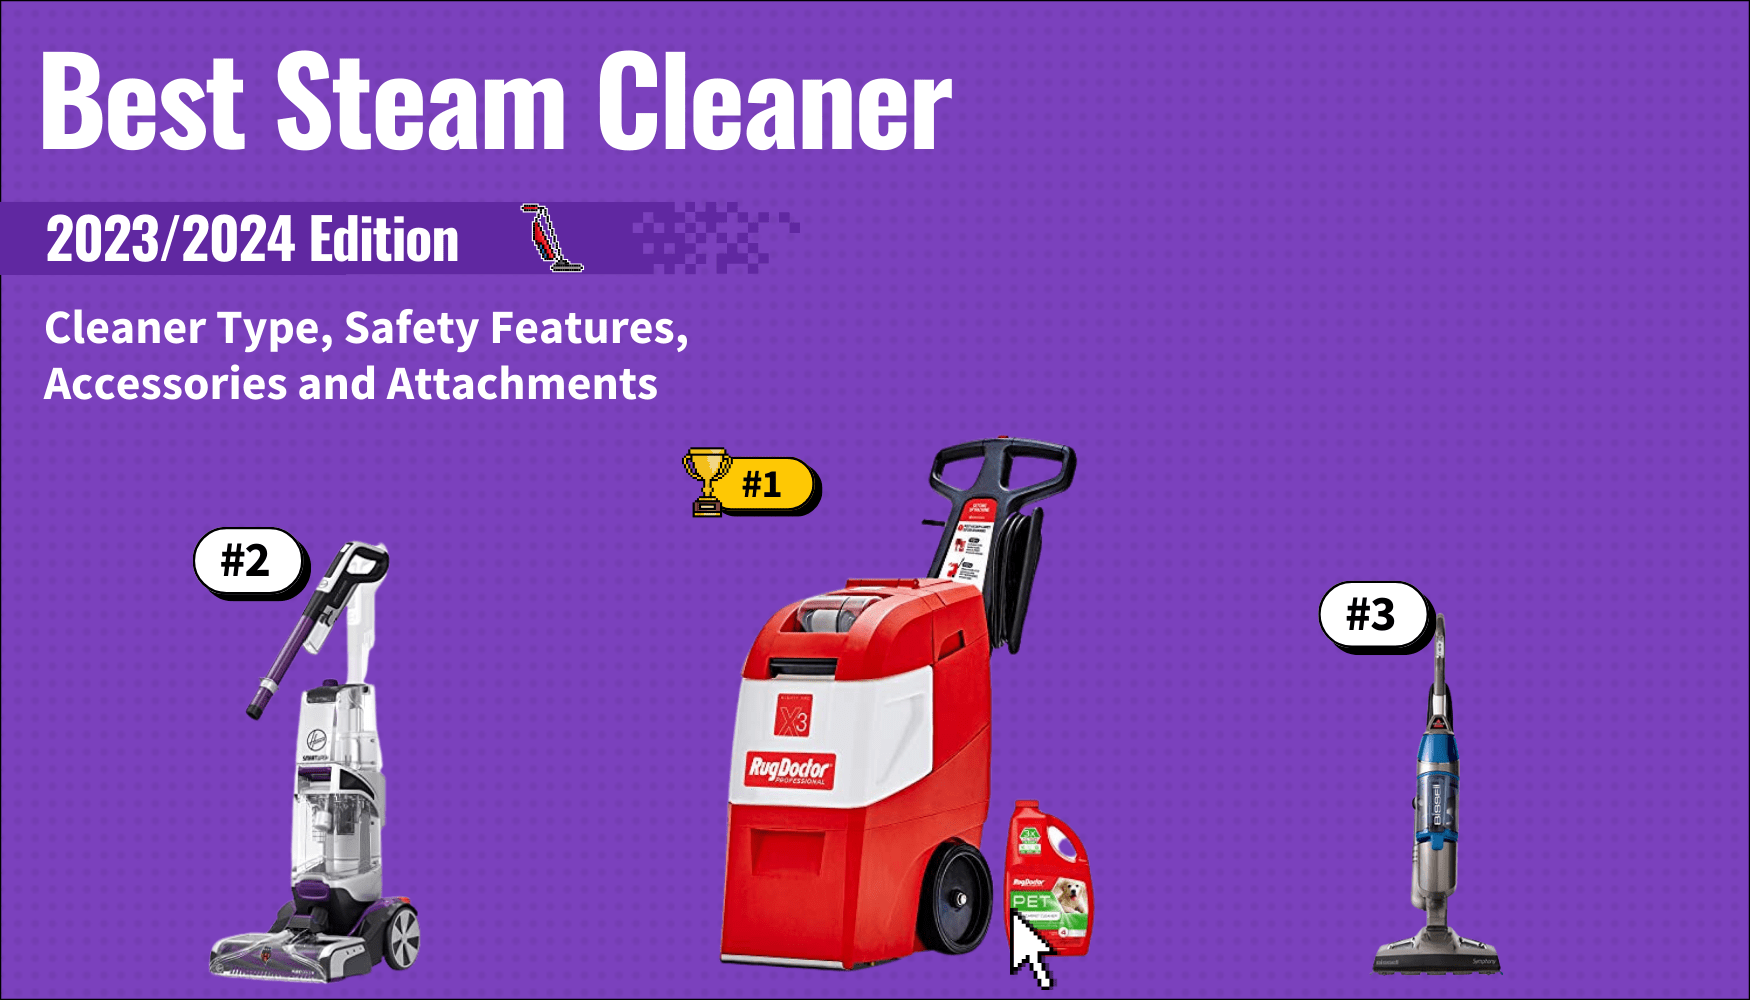 best steam cleaner guide that shows the top best vacuum cleaner model